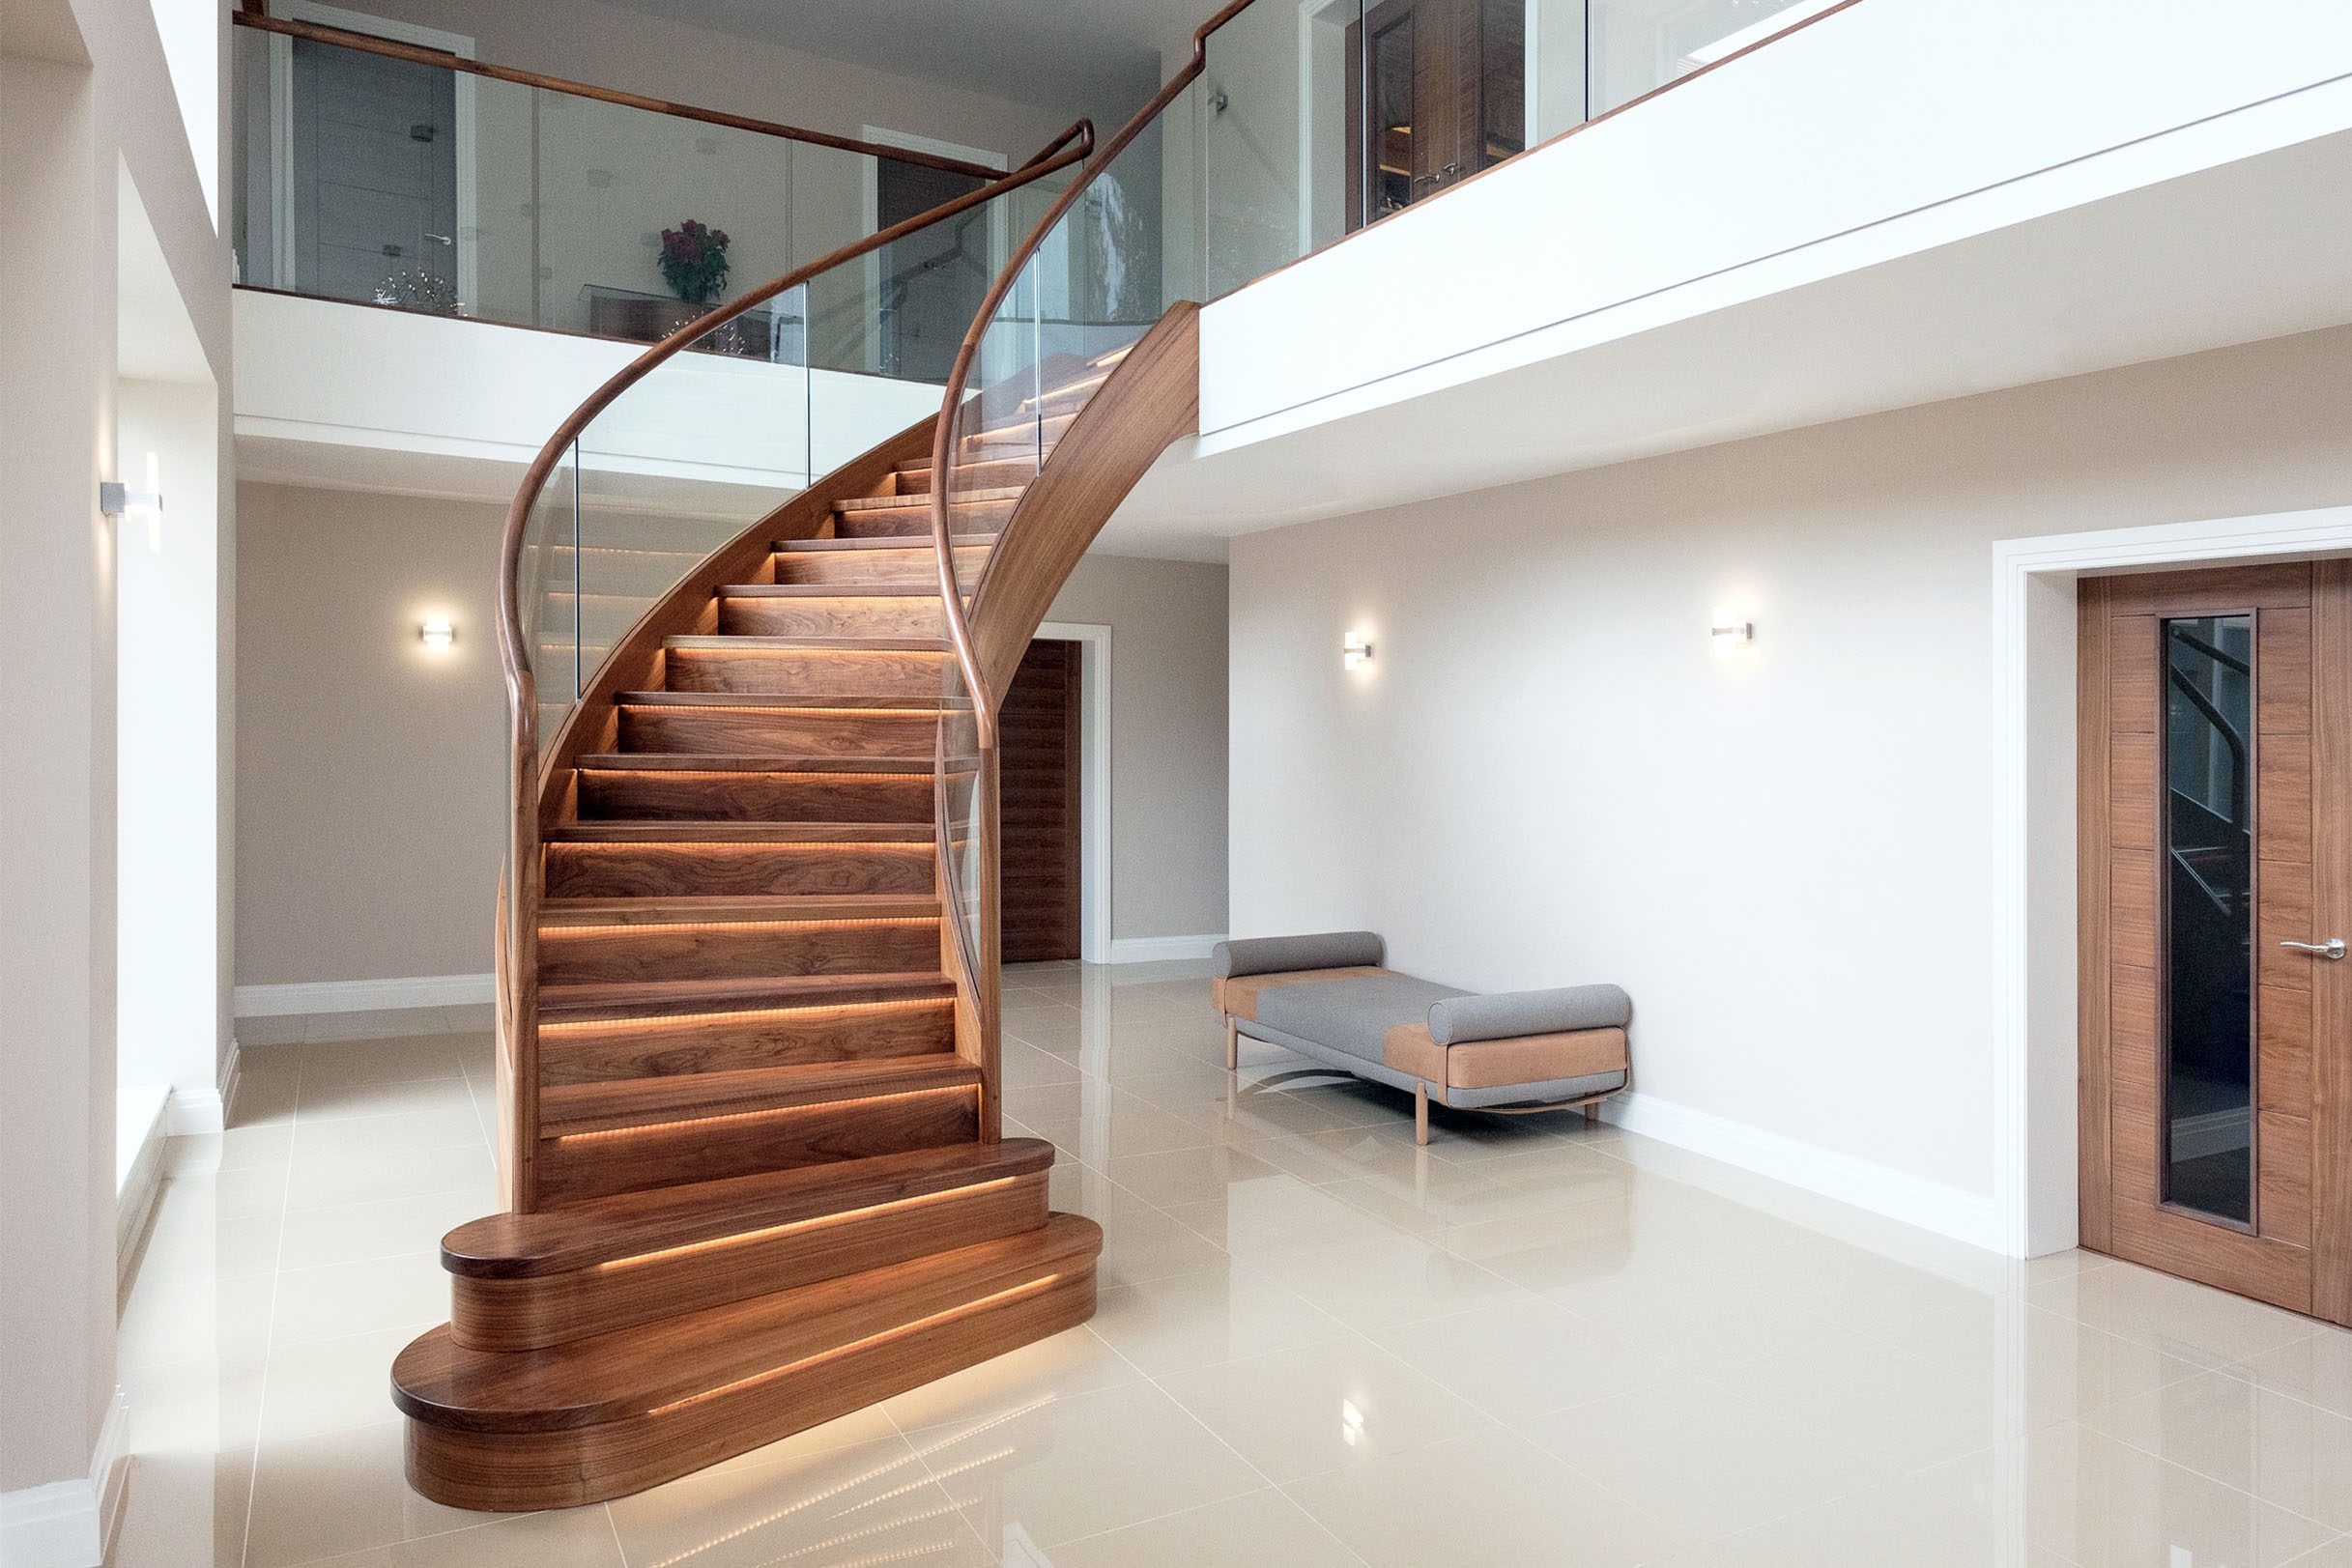 Interior view of sweeping curved walnut stair with curved glass and tread lighting.